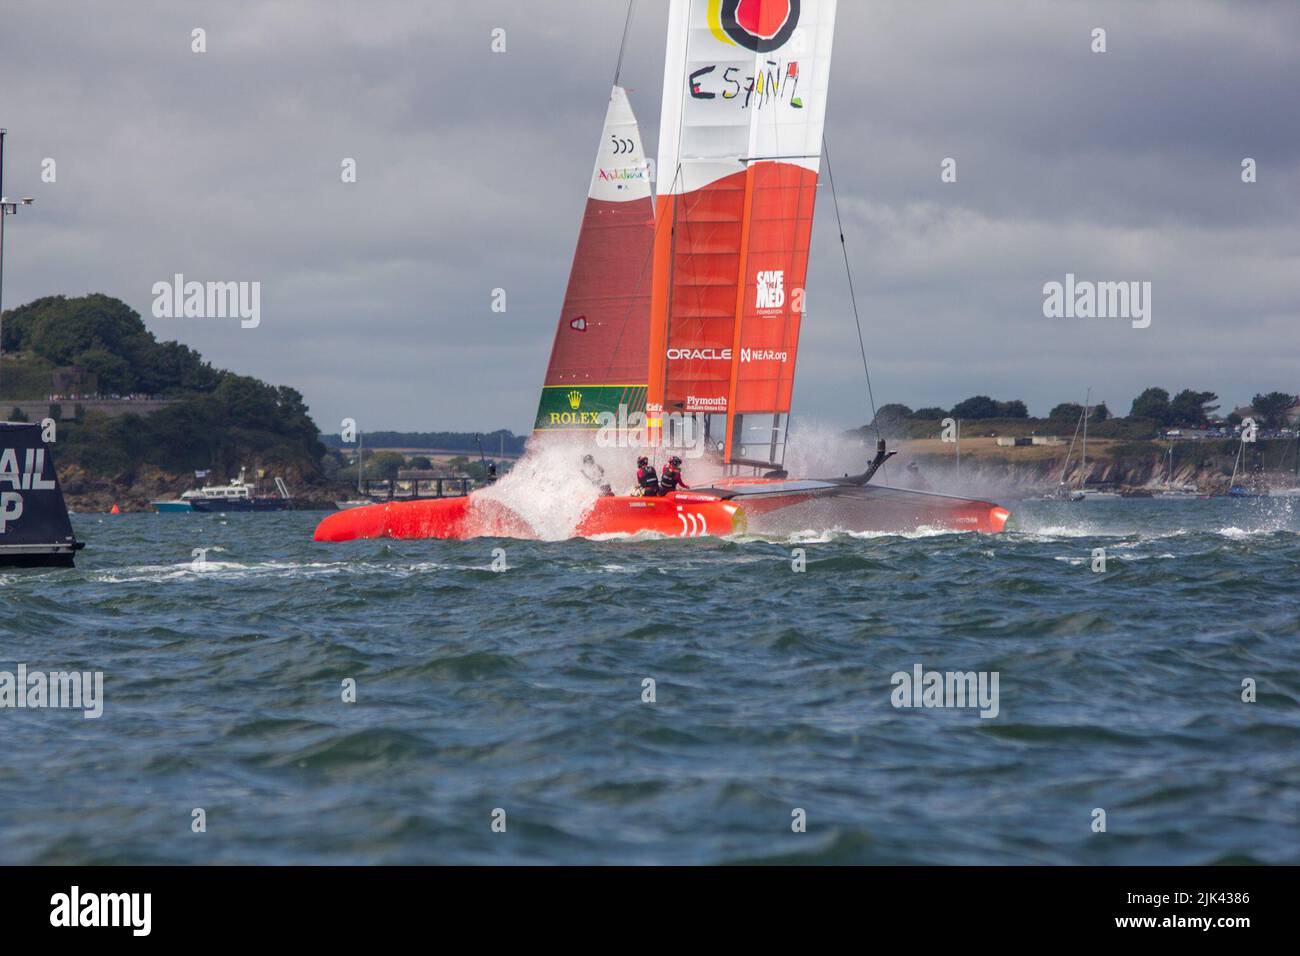 SailGP, Plymouth, UK. 30th July, 2022. Spain Dives into the water! Day 1 for the Great British Sail Grand Prix, as Britain's Ocean City hosts the third event of Season 3 as the most competitive racing on water. The event returns to Plymouth on 30-31 July. Credit: Julian Kemp/Alamy Live News Stock Photo